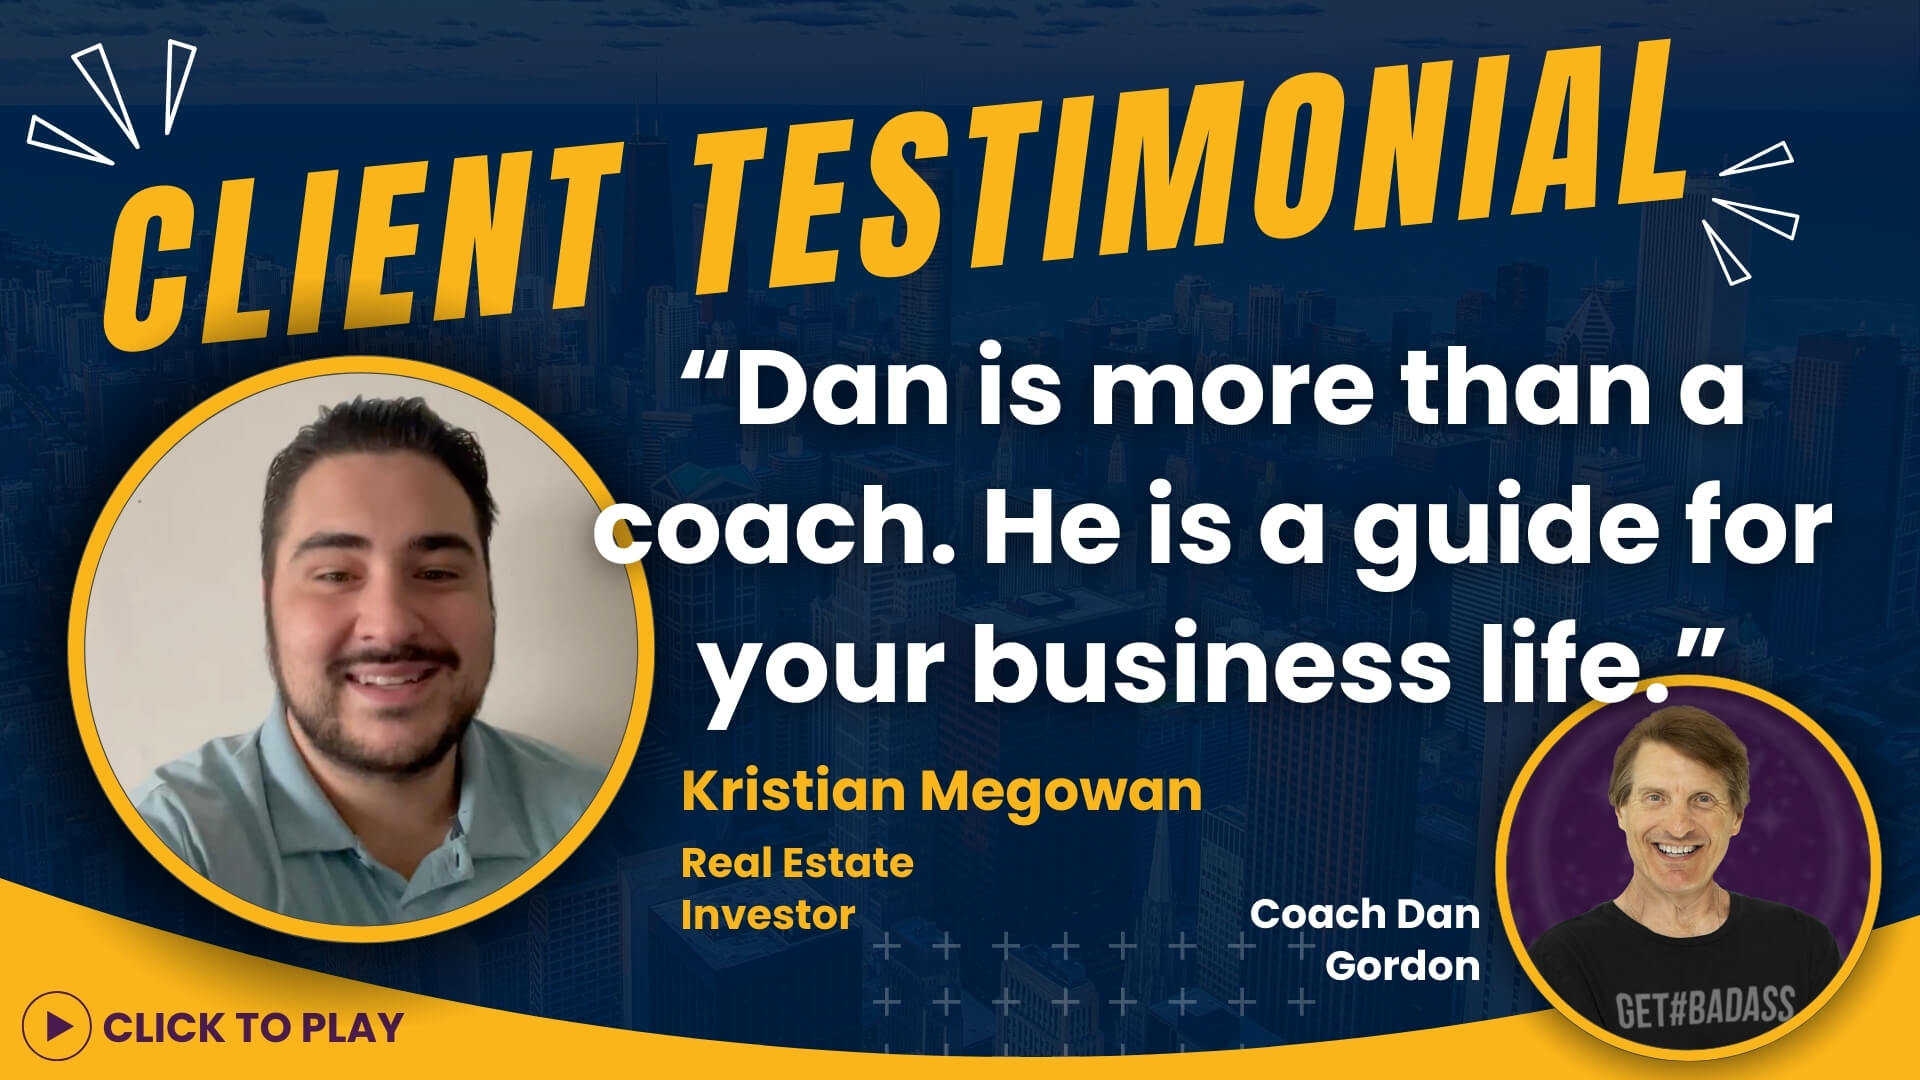 Kristian Megowan, a real estate investor, smiling in a casual setting, shares how Coach Dan Gordon serves as a guide in his business life.